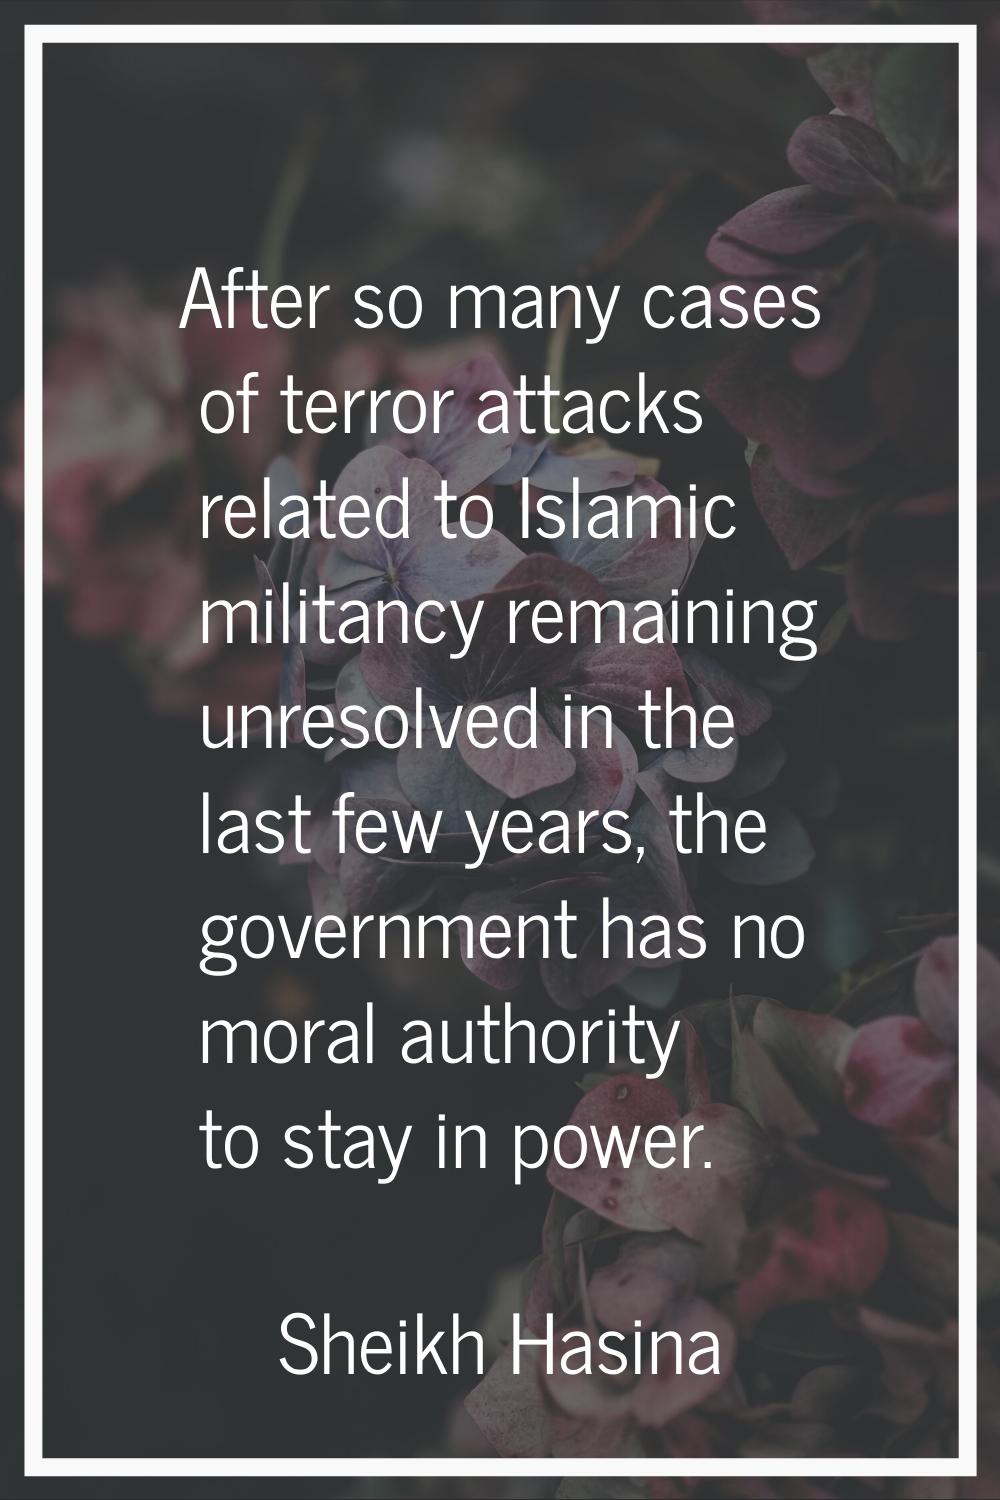 After so many cases of terror attacks related to Islamic militancy remaining unresolved in the last